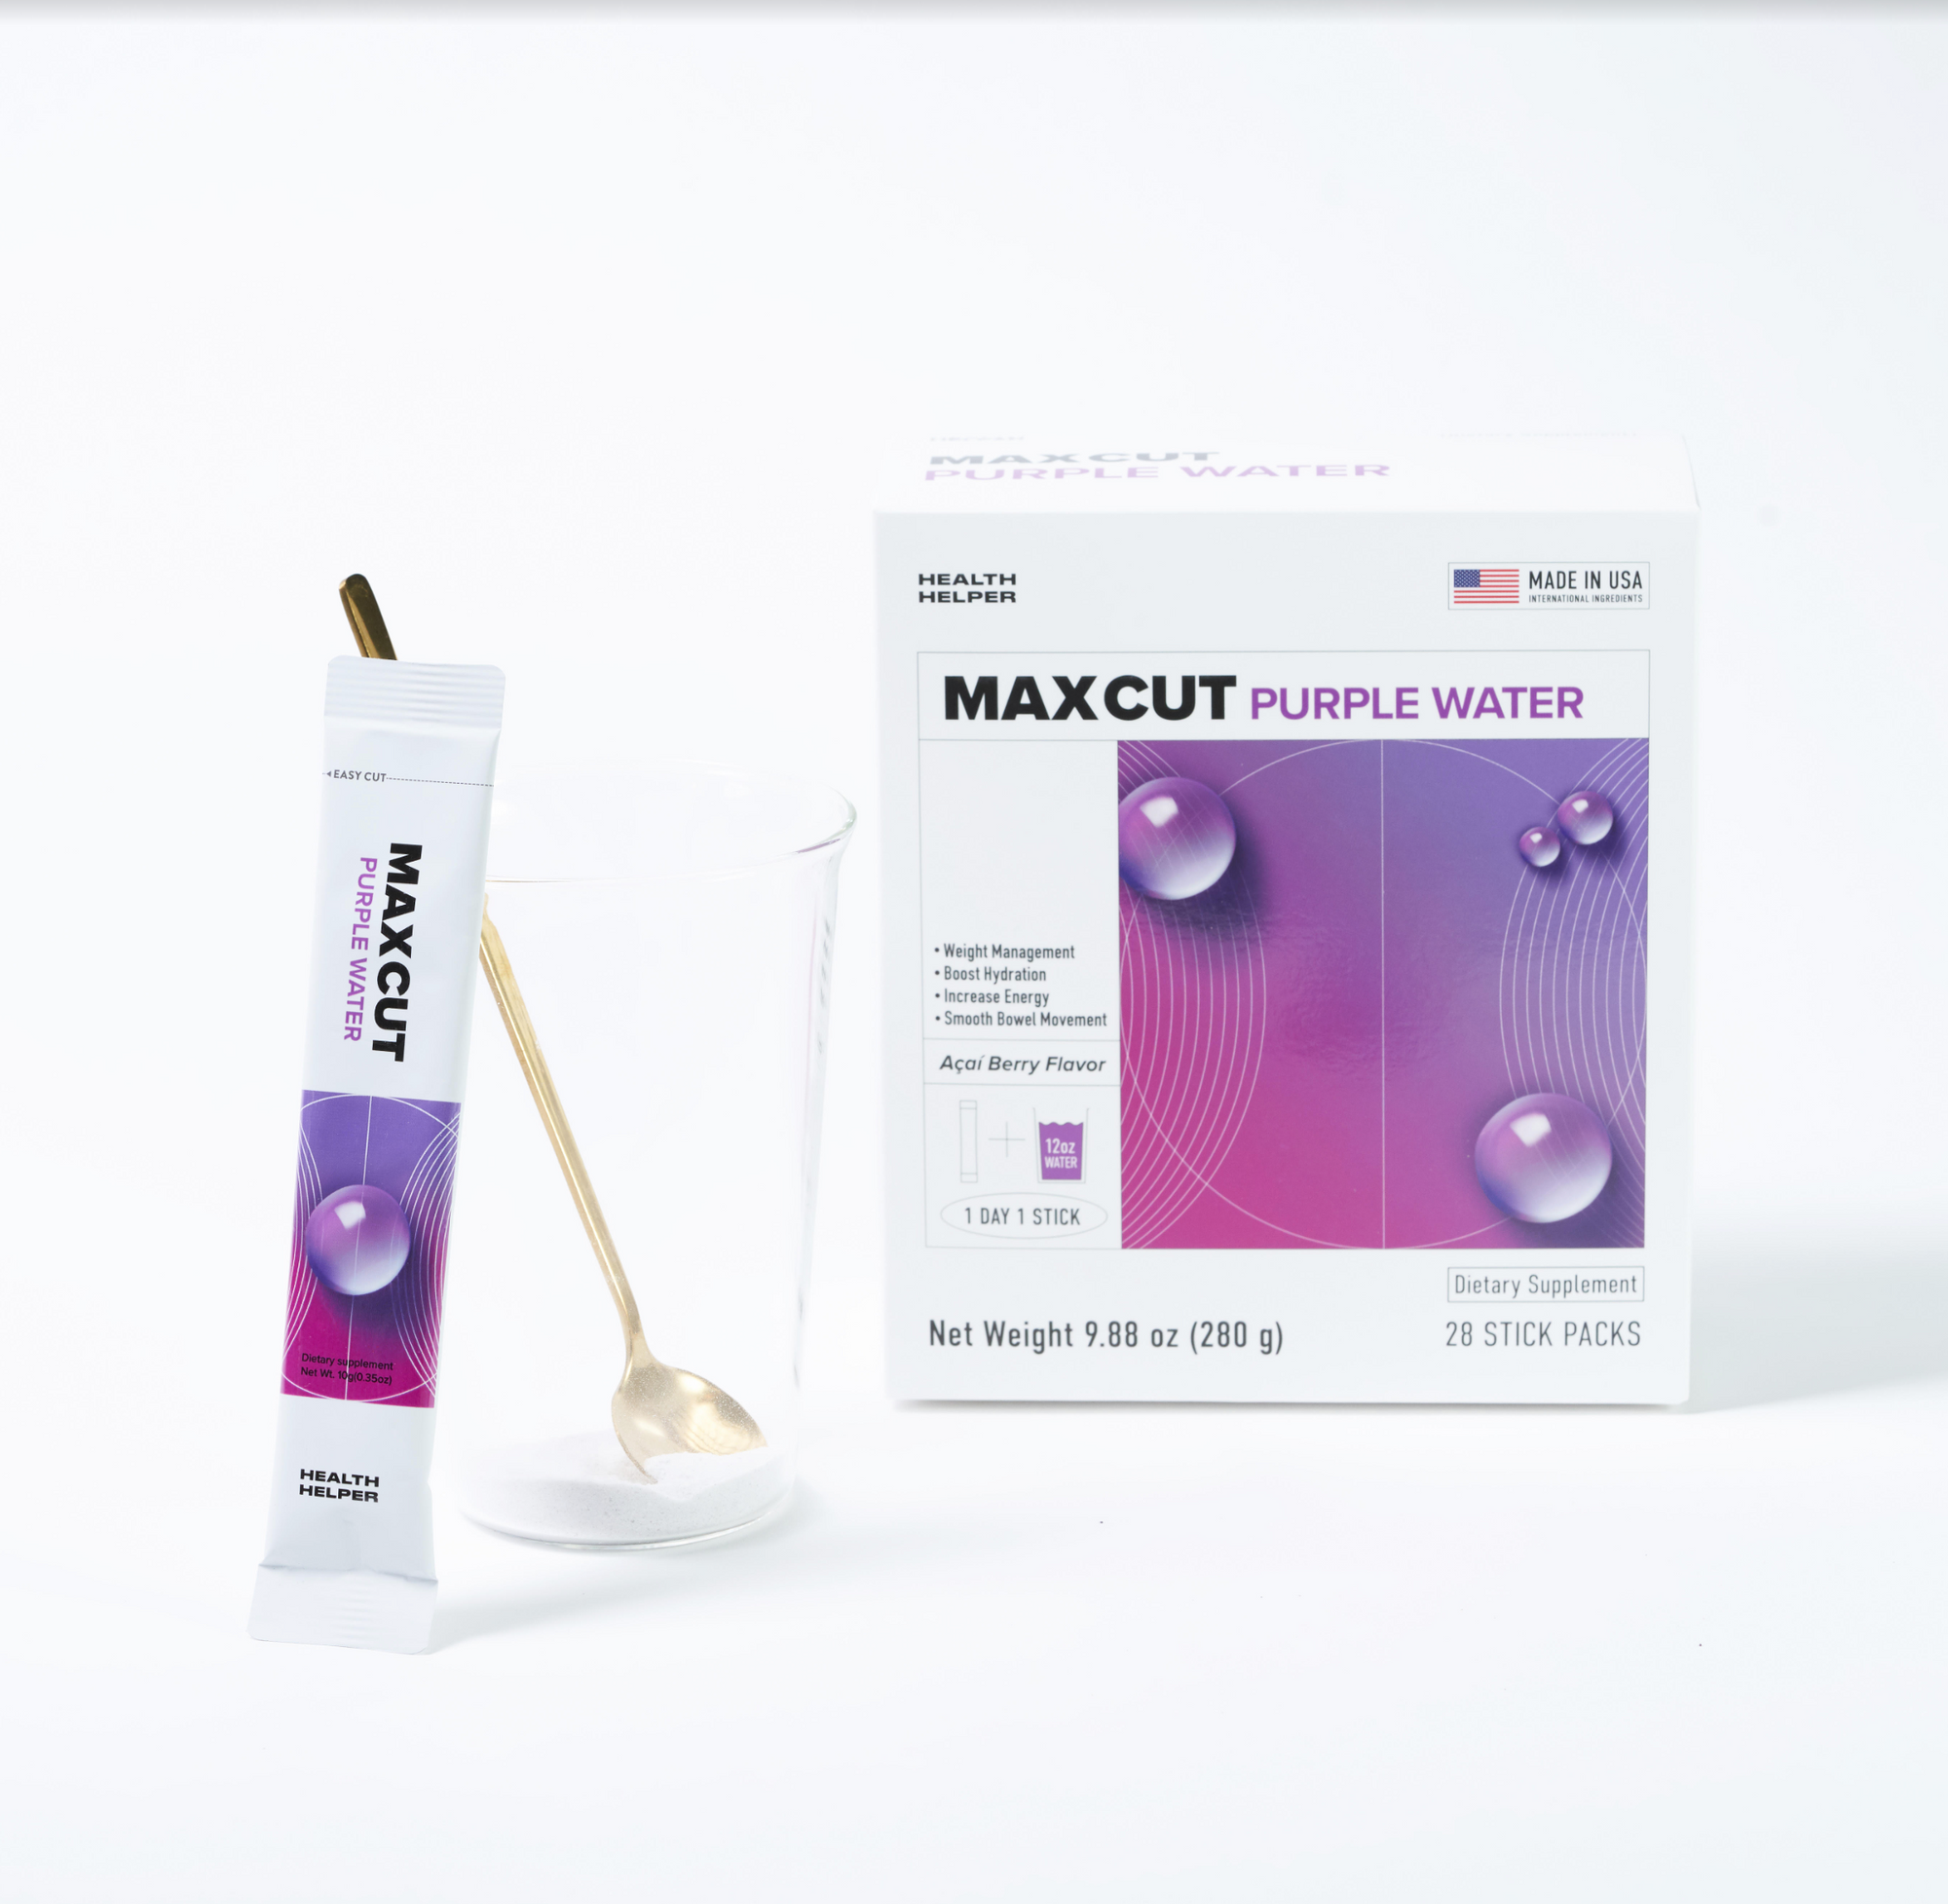 Maxcut Purple Water - weight management, boost hydration, increase energy, smooth bowel movement, acai berry flavor